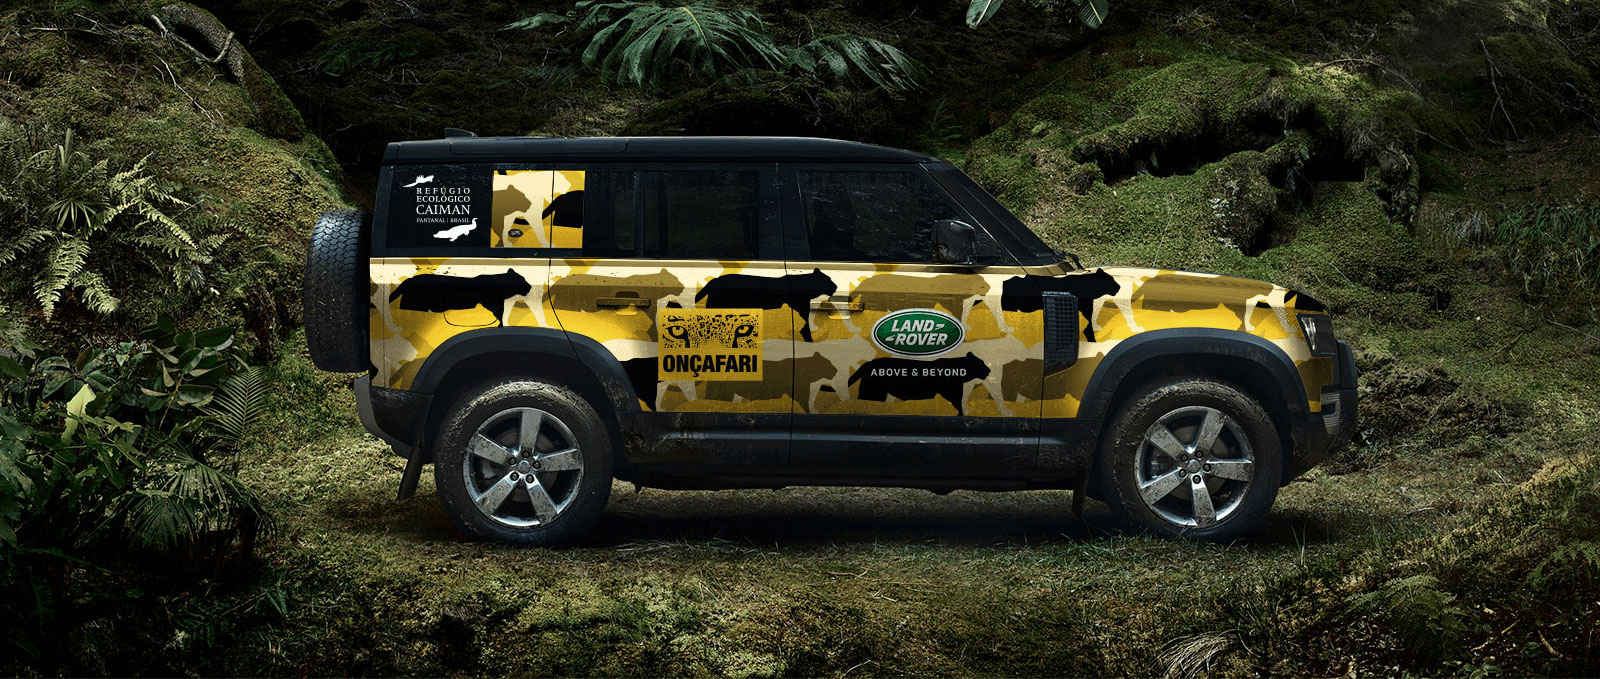 Land Rover, our partner, recently introduced its newest launch